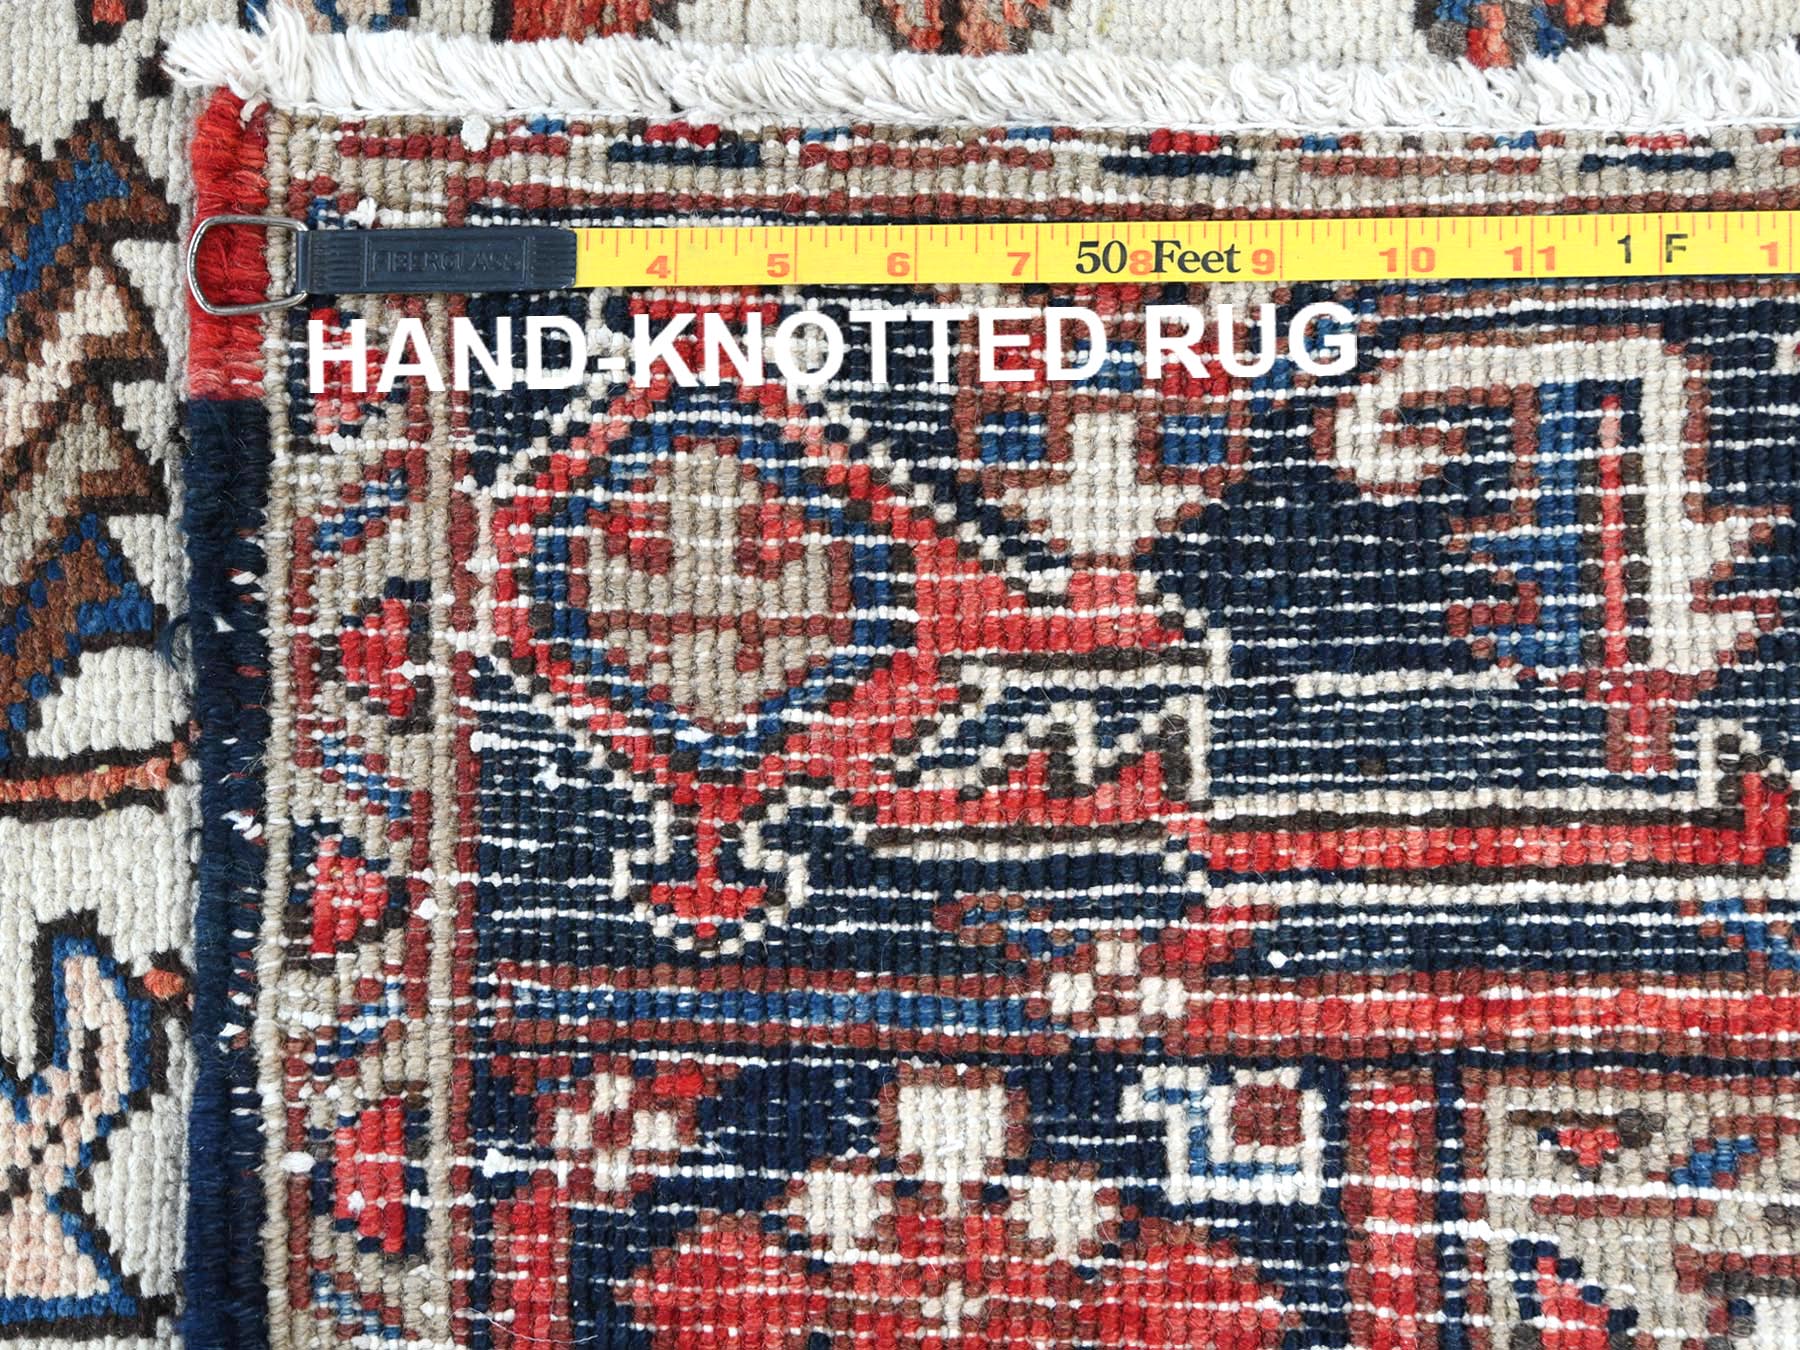 Overdyed & Vintage Rugs LUV731016